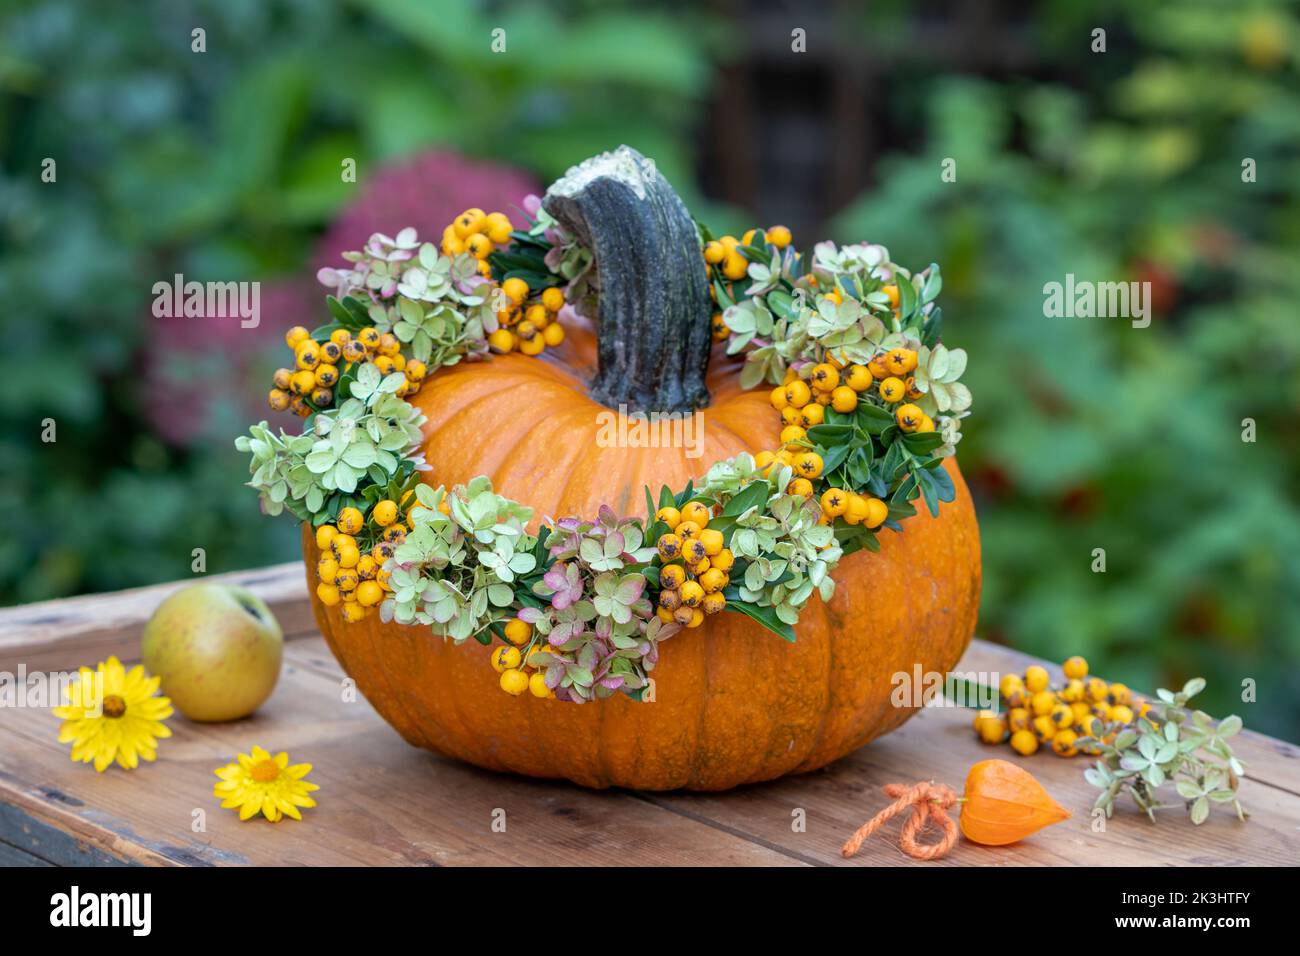 autumn arrangement with pumpkin and wreath of firethorn berries, hydrangea flowers and box tree branches Stock Photo